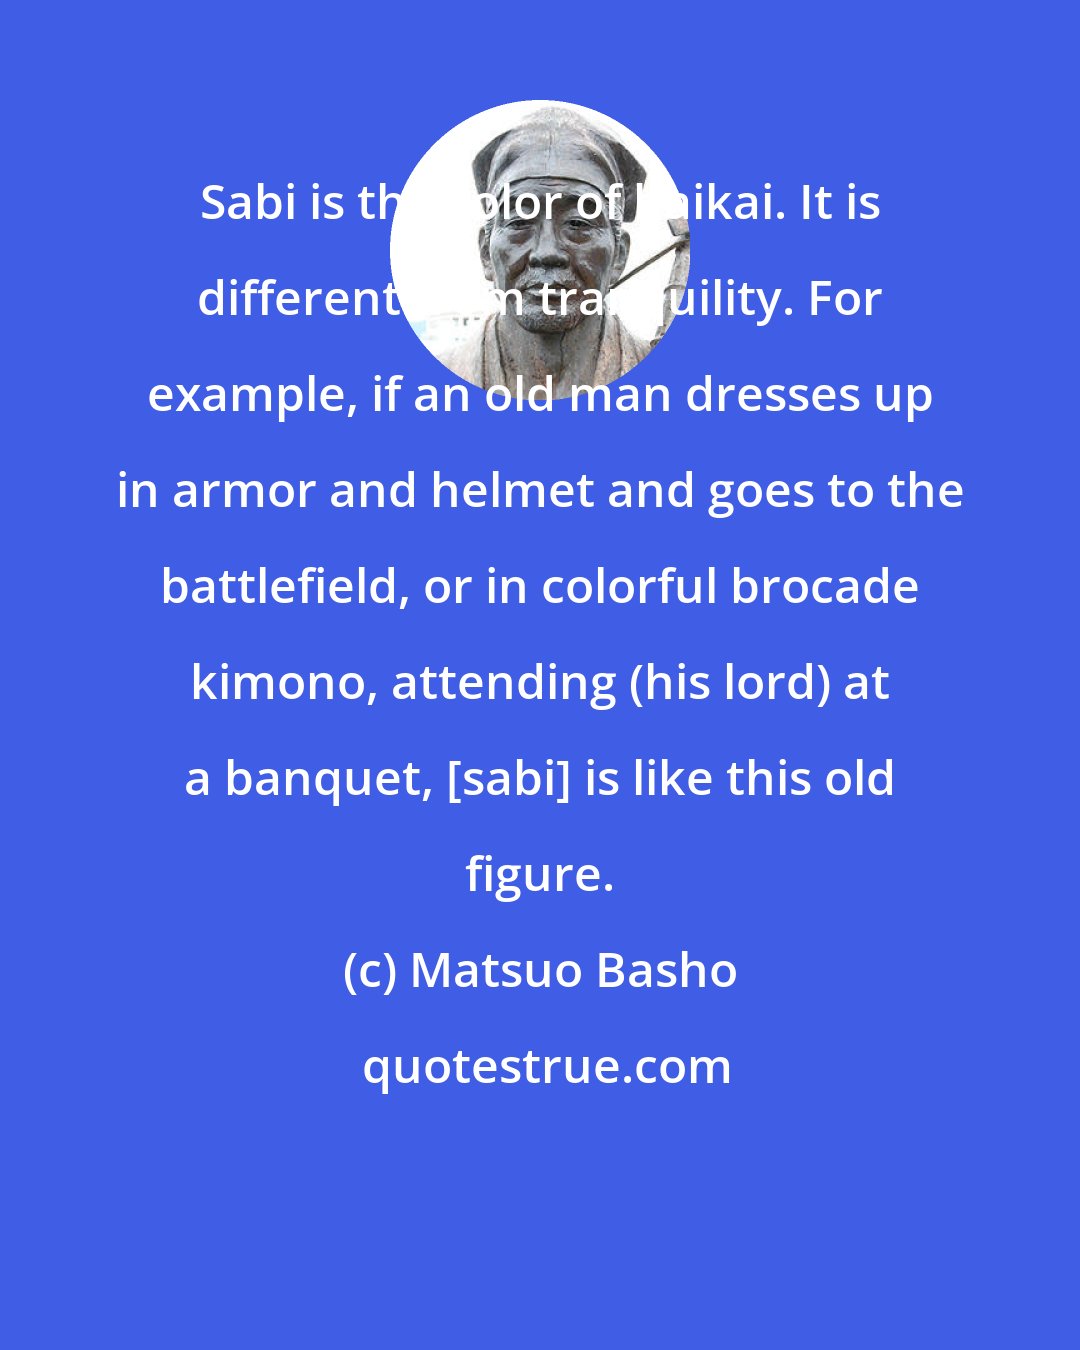 Matsuo Basho: Sabi is the color of haikai. It is different from tranquility. For example, if an old man dresses up in armor and helmet and goes to the battlefield, or in colorful brocade kimono, attending (his lord) at a banquet, [sabi] is like this old figure.